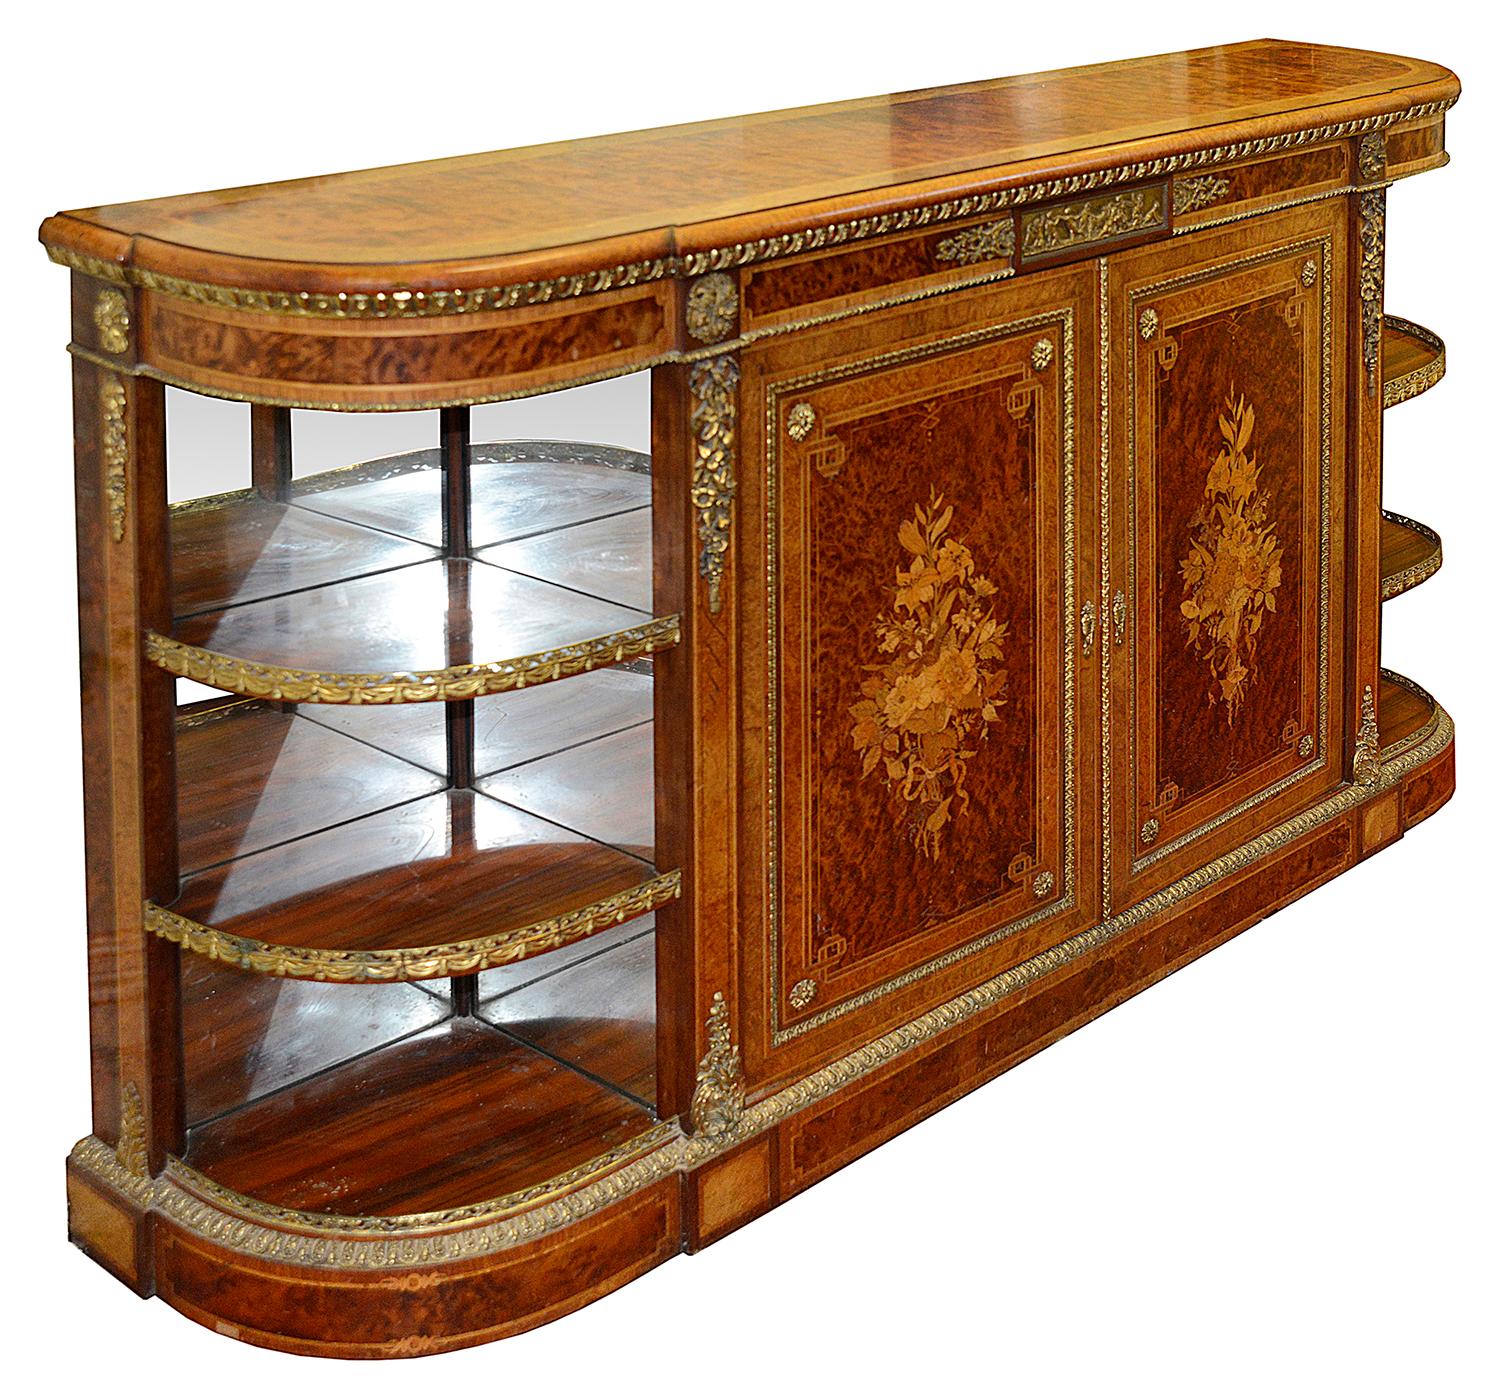 A fine quality 19th century mahogany, amboyna veneered credenza / side cabinet, having wonderful gilded ormolu mounts and a plaque to the frieze depicting children playing a game of tug of war with a goat. The two central doors with boxwood inlaid